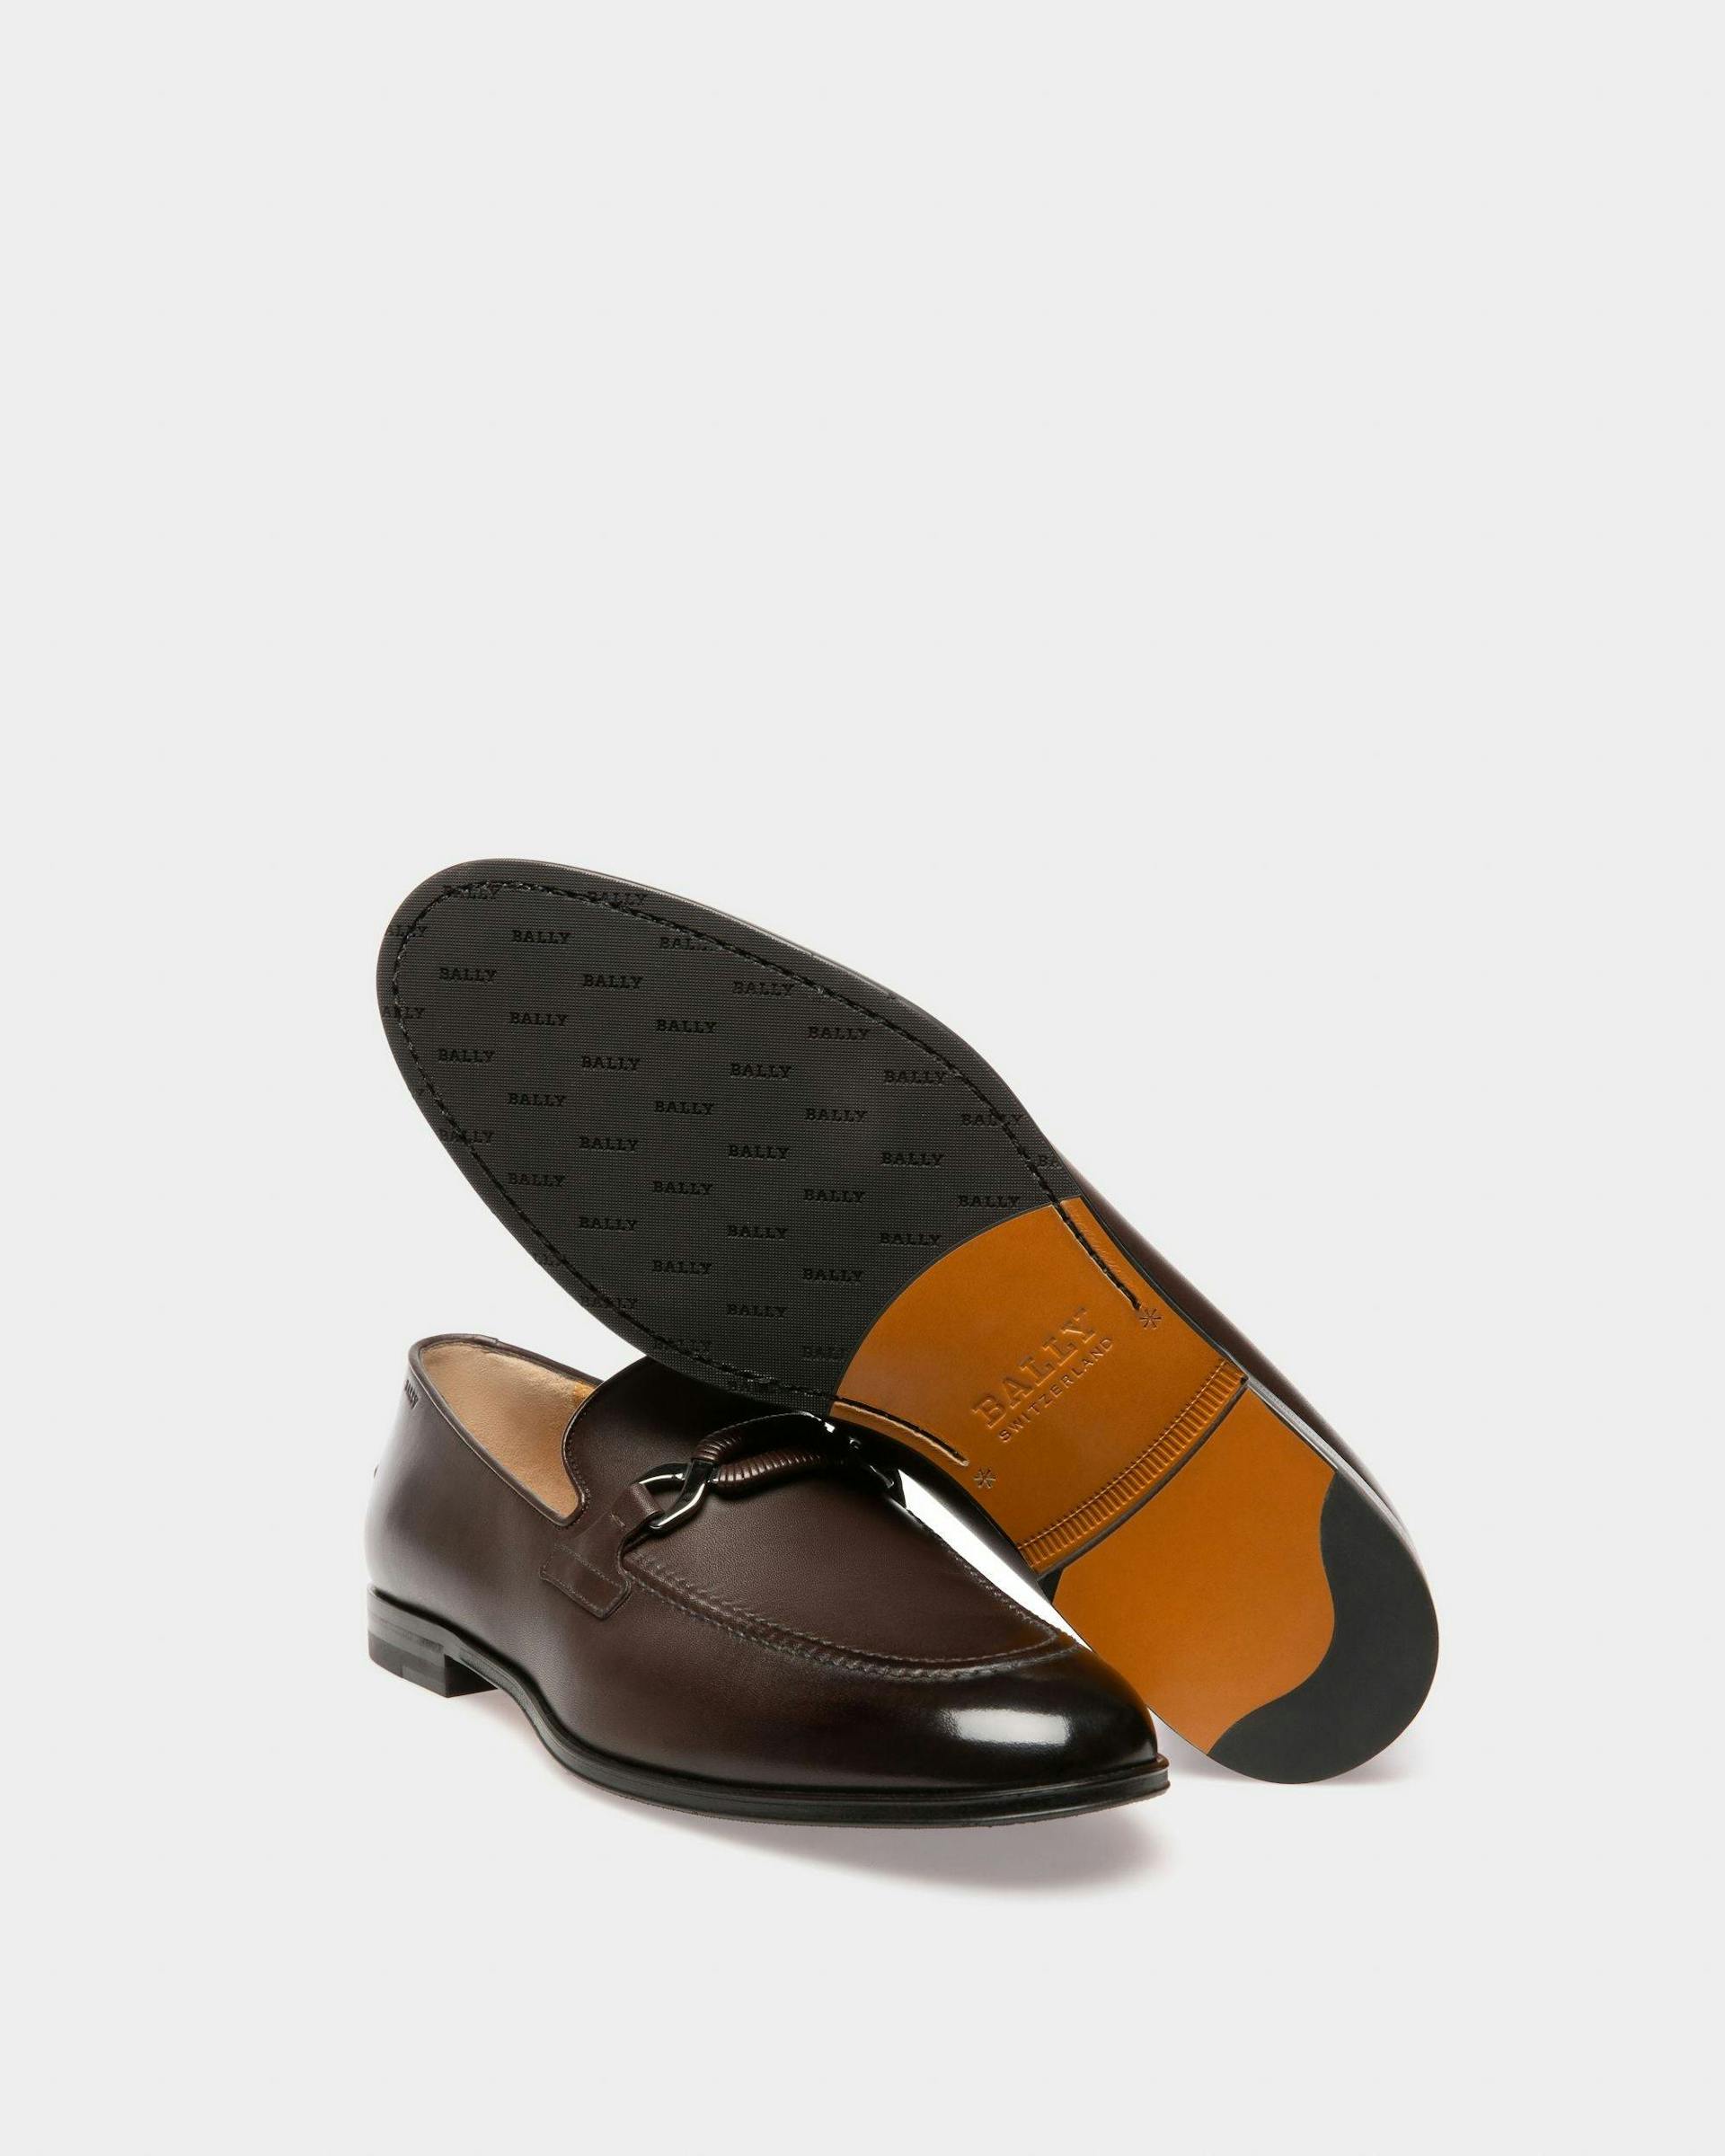 Wernof Leather Loafers In Brown - Men's - Bally - 05